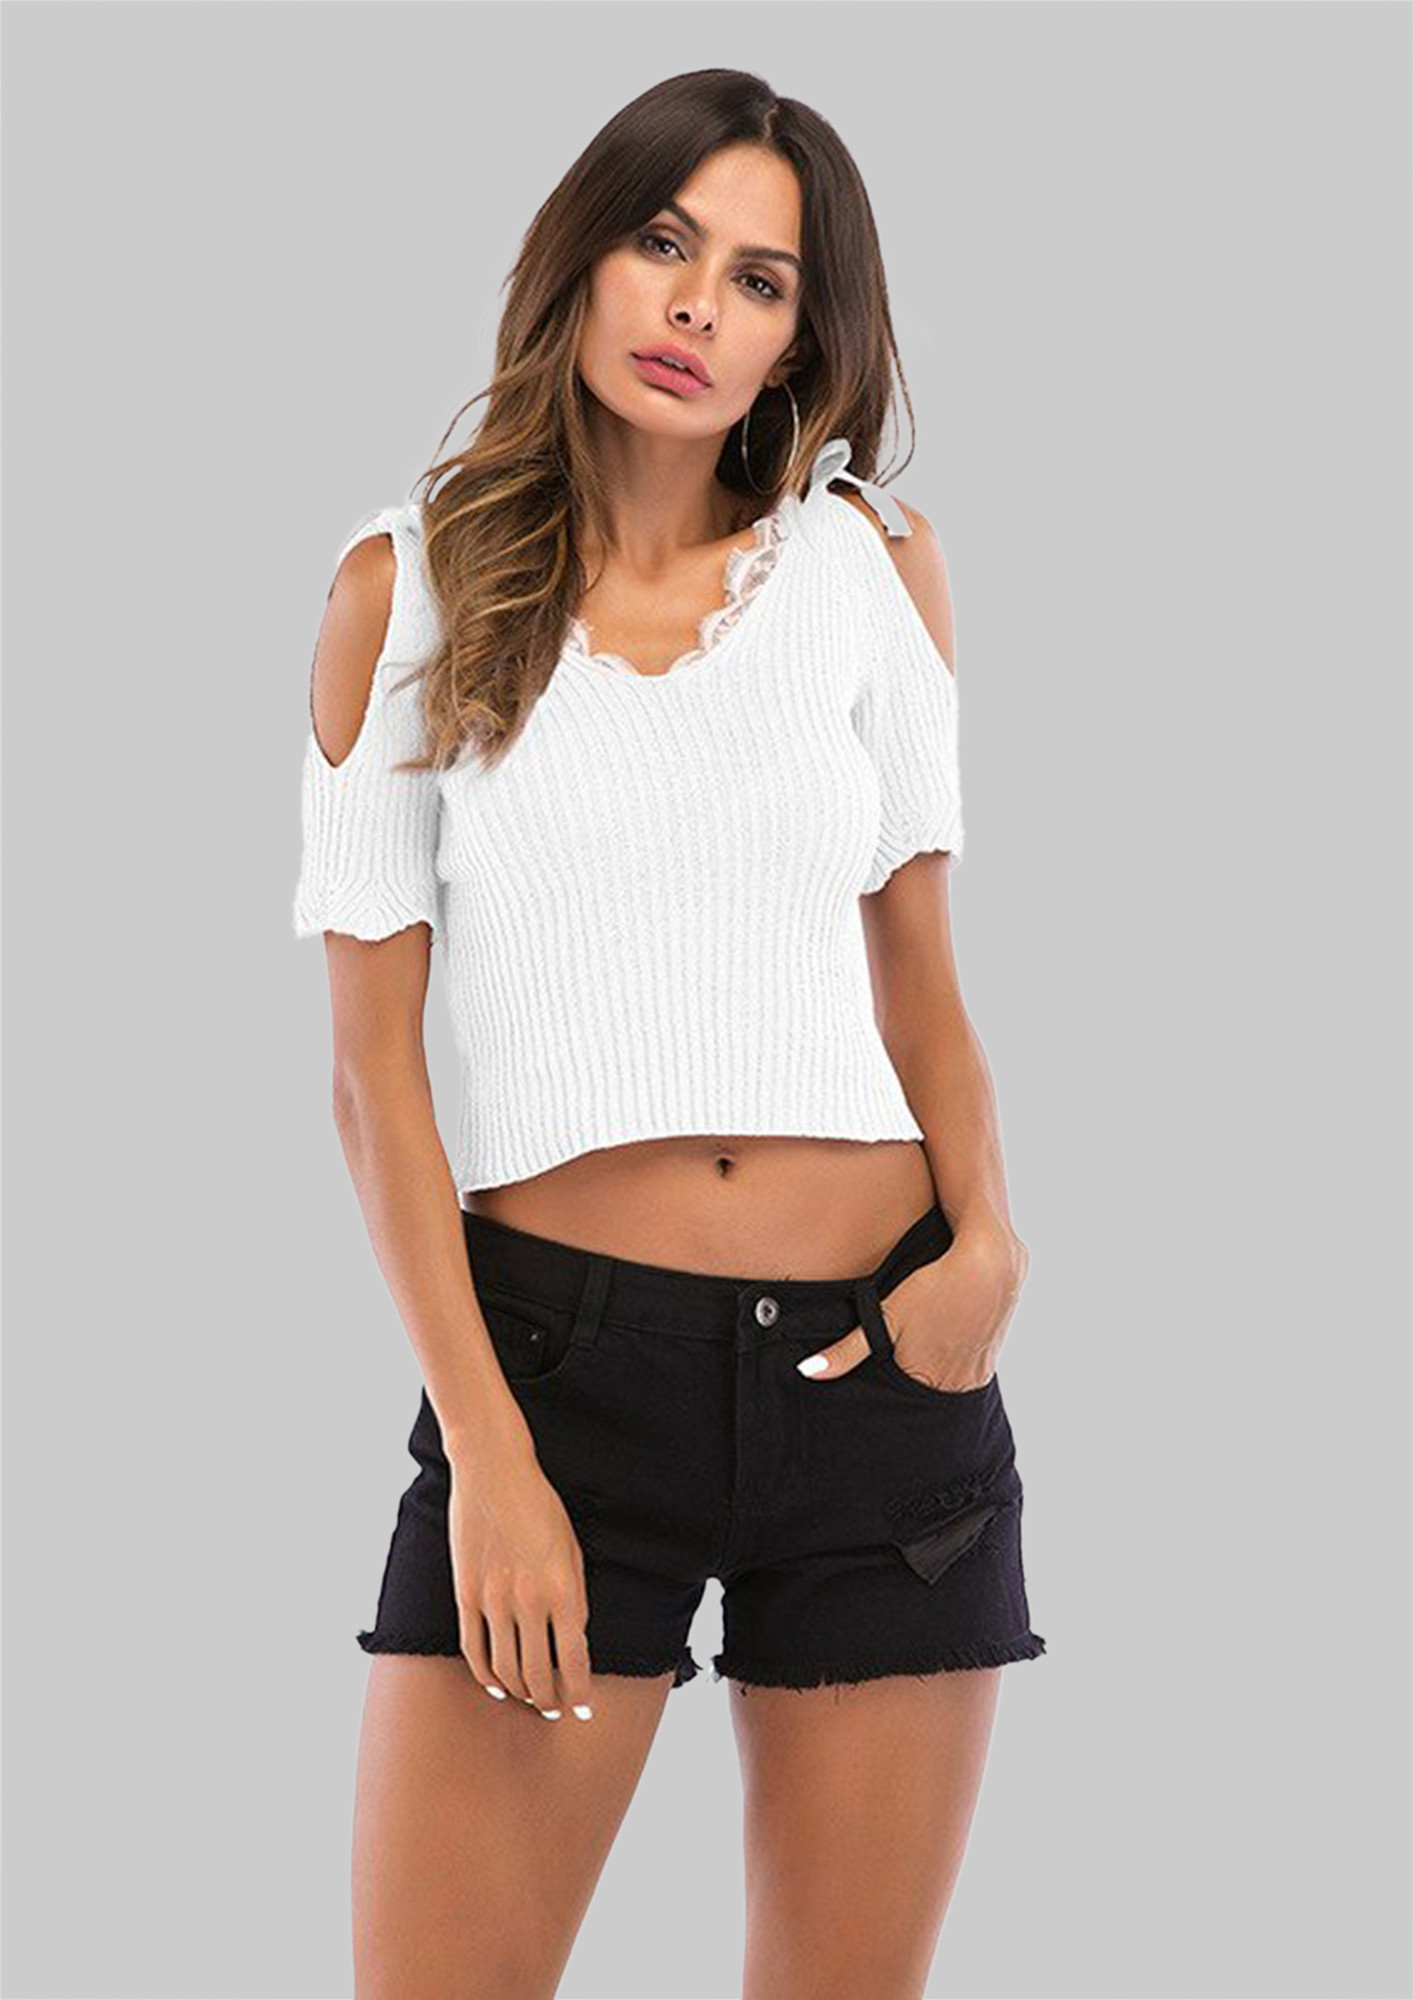 IN RIBBED CUT-OUT SHORT SLEEVE WHITE CROP TOP